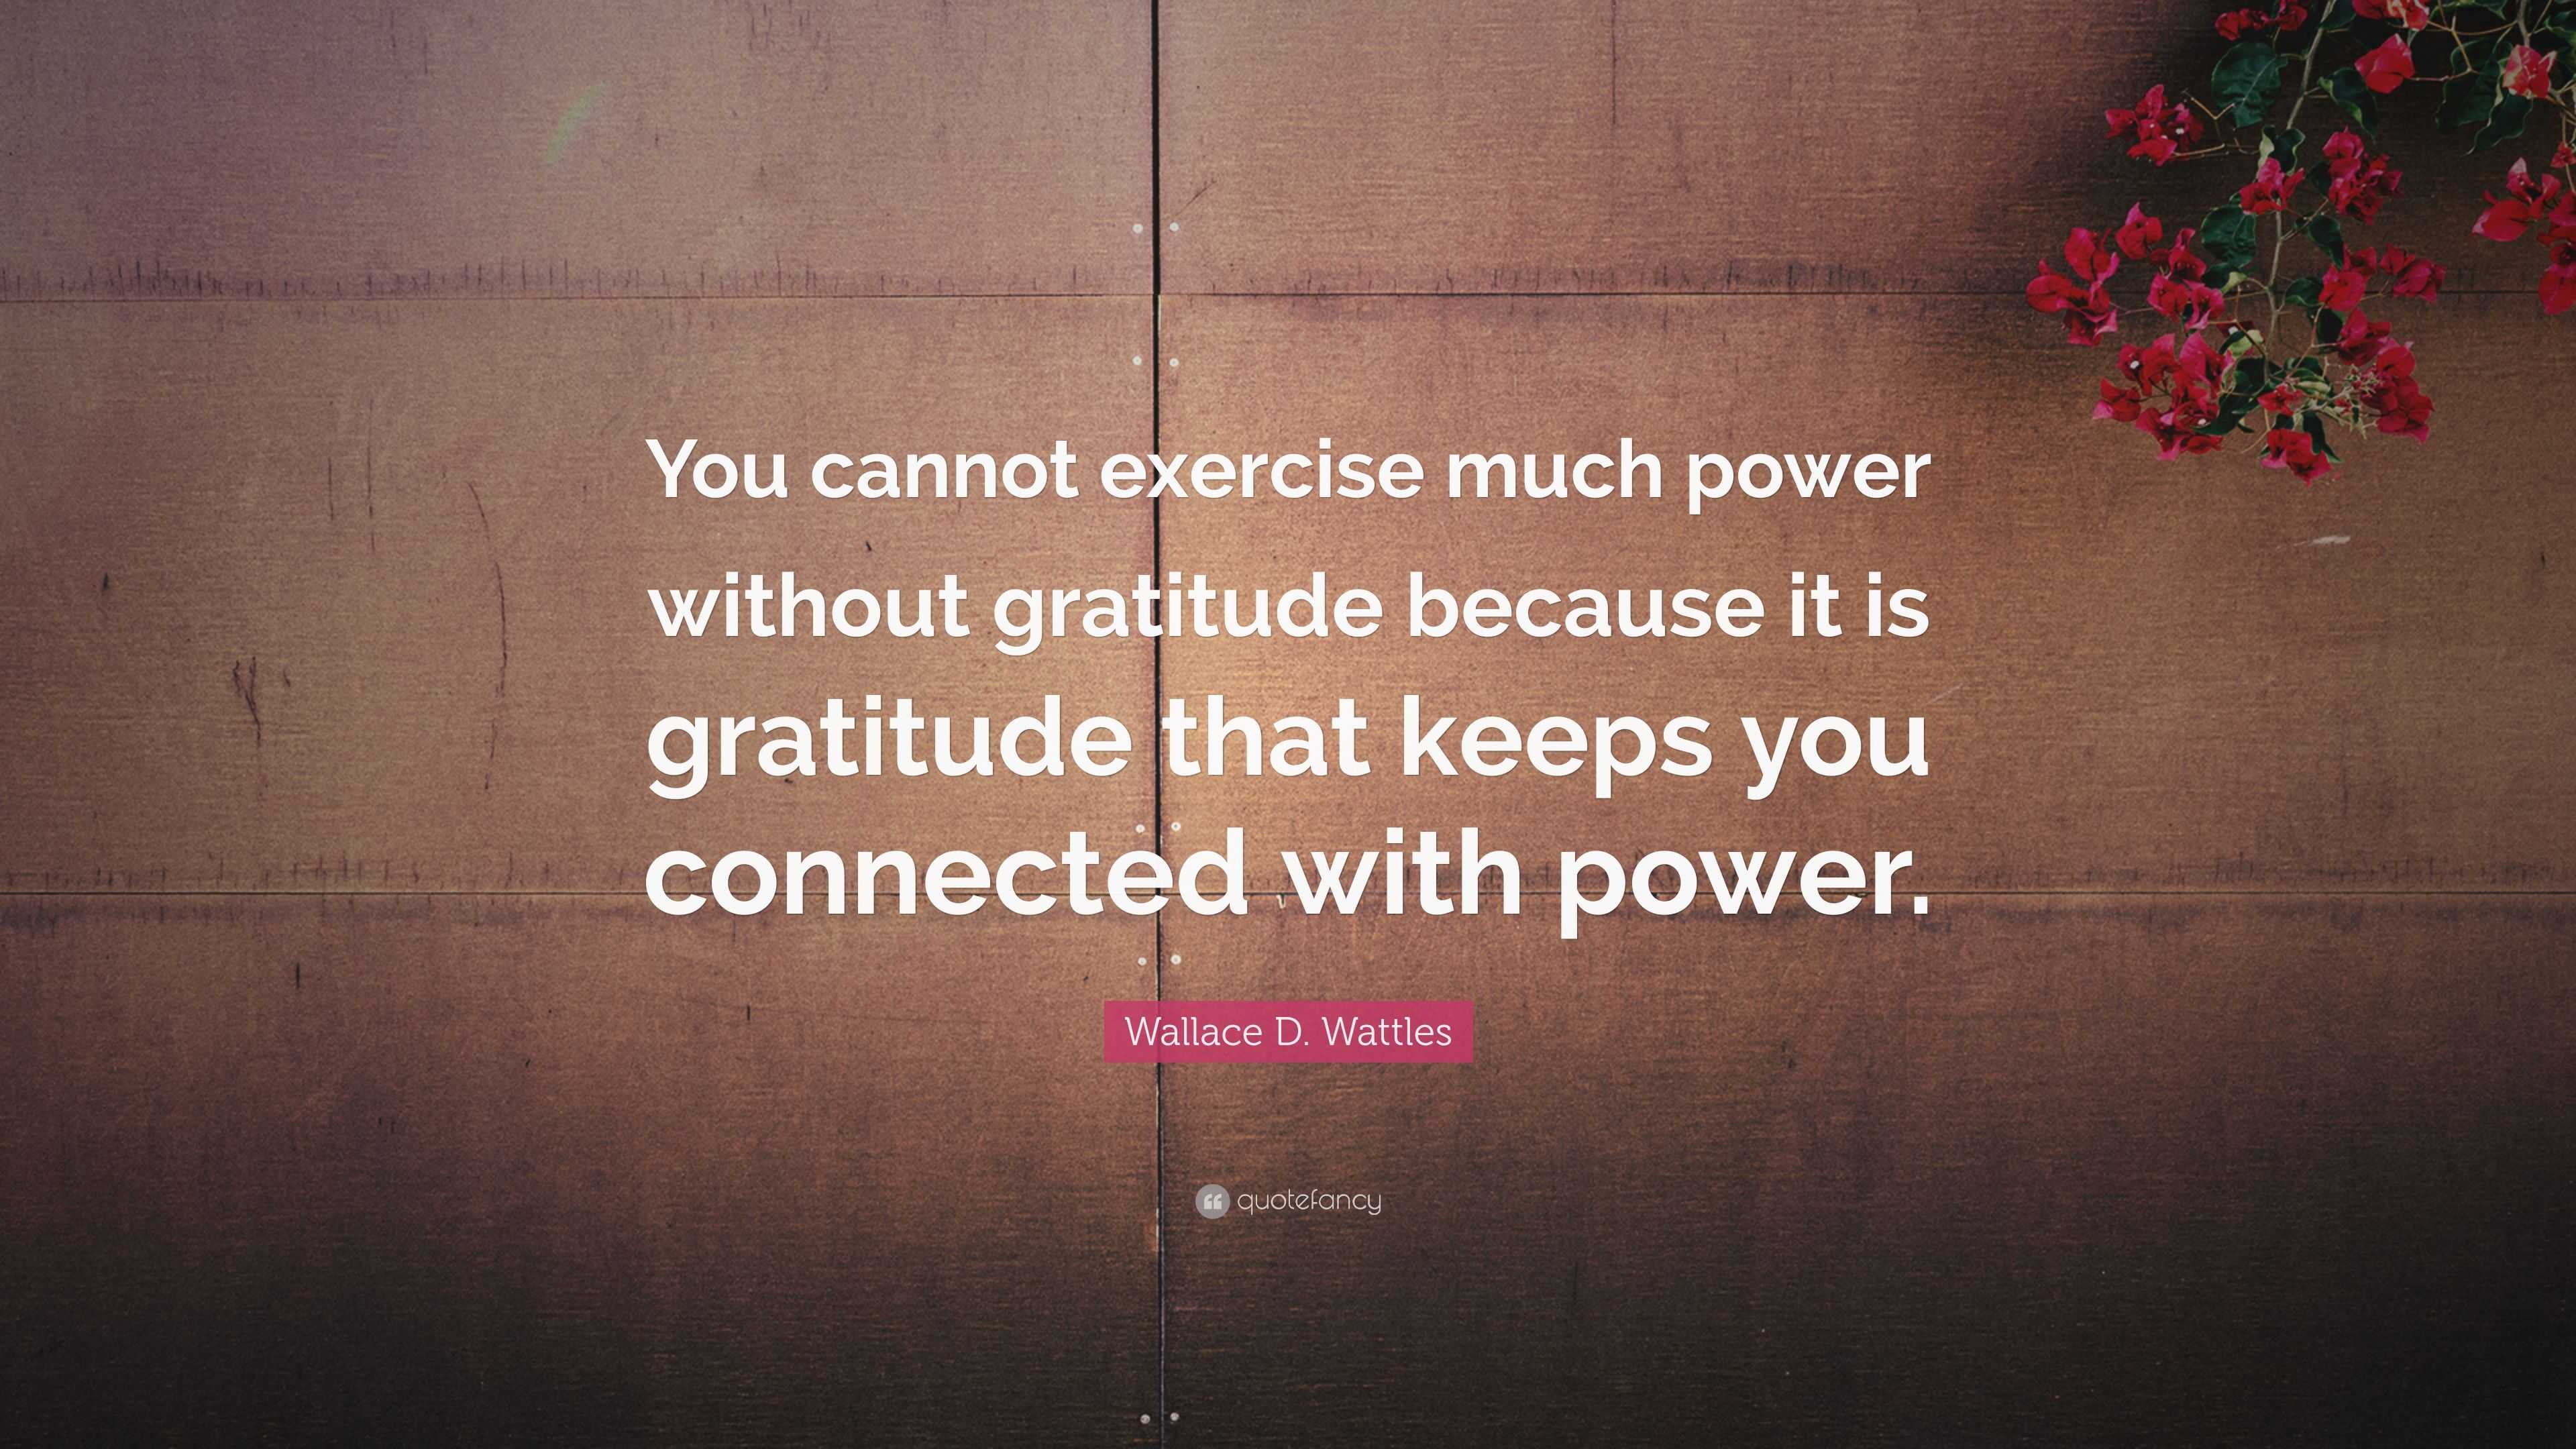 Wallace D. Wattles Quote: “You cannot exercise much power without ...